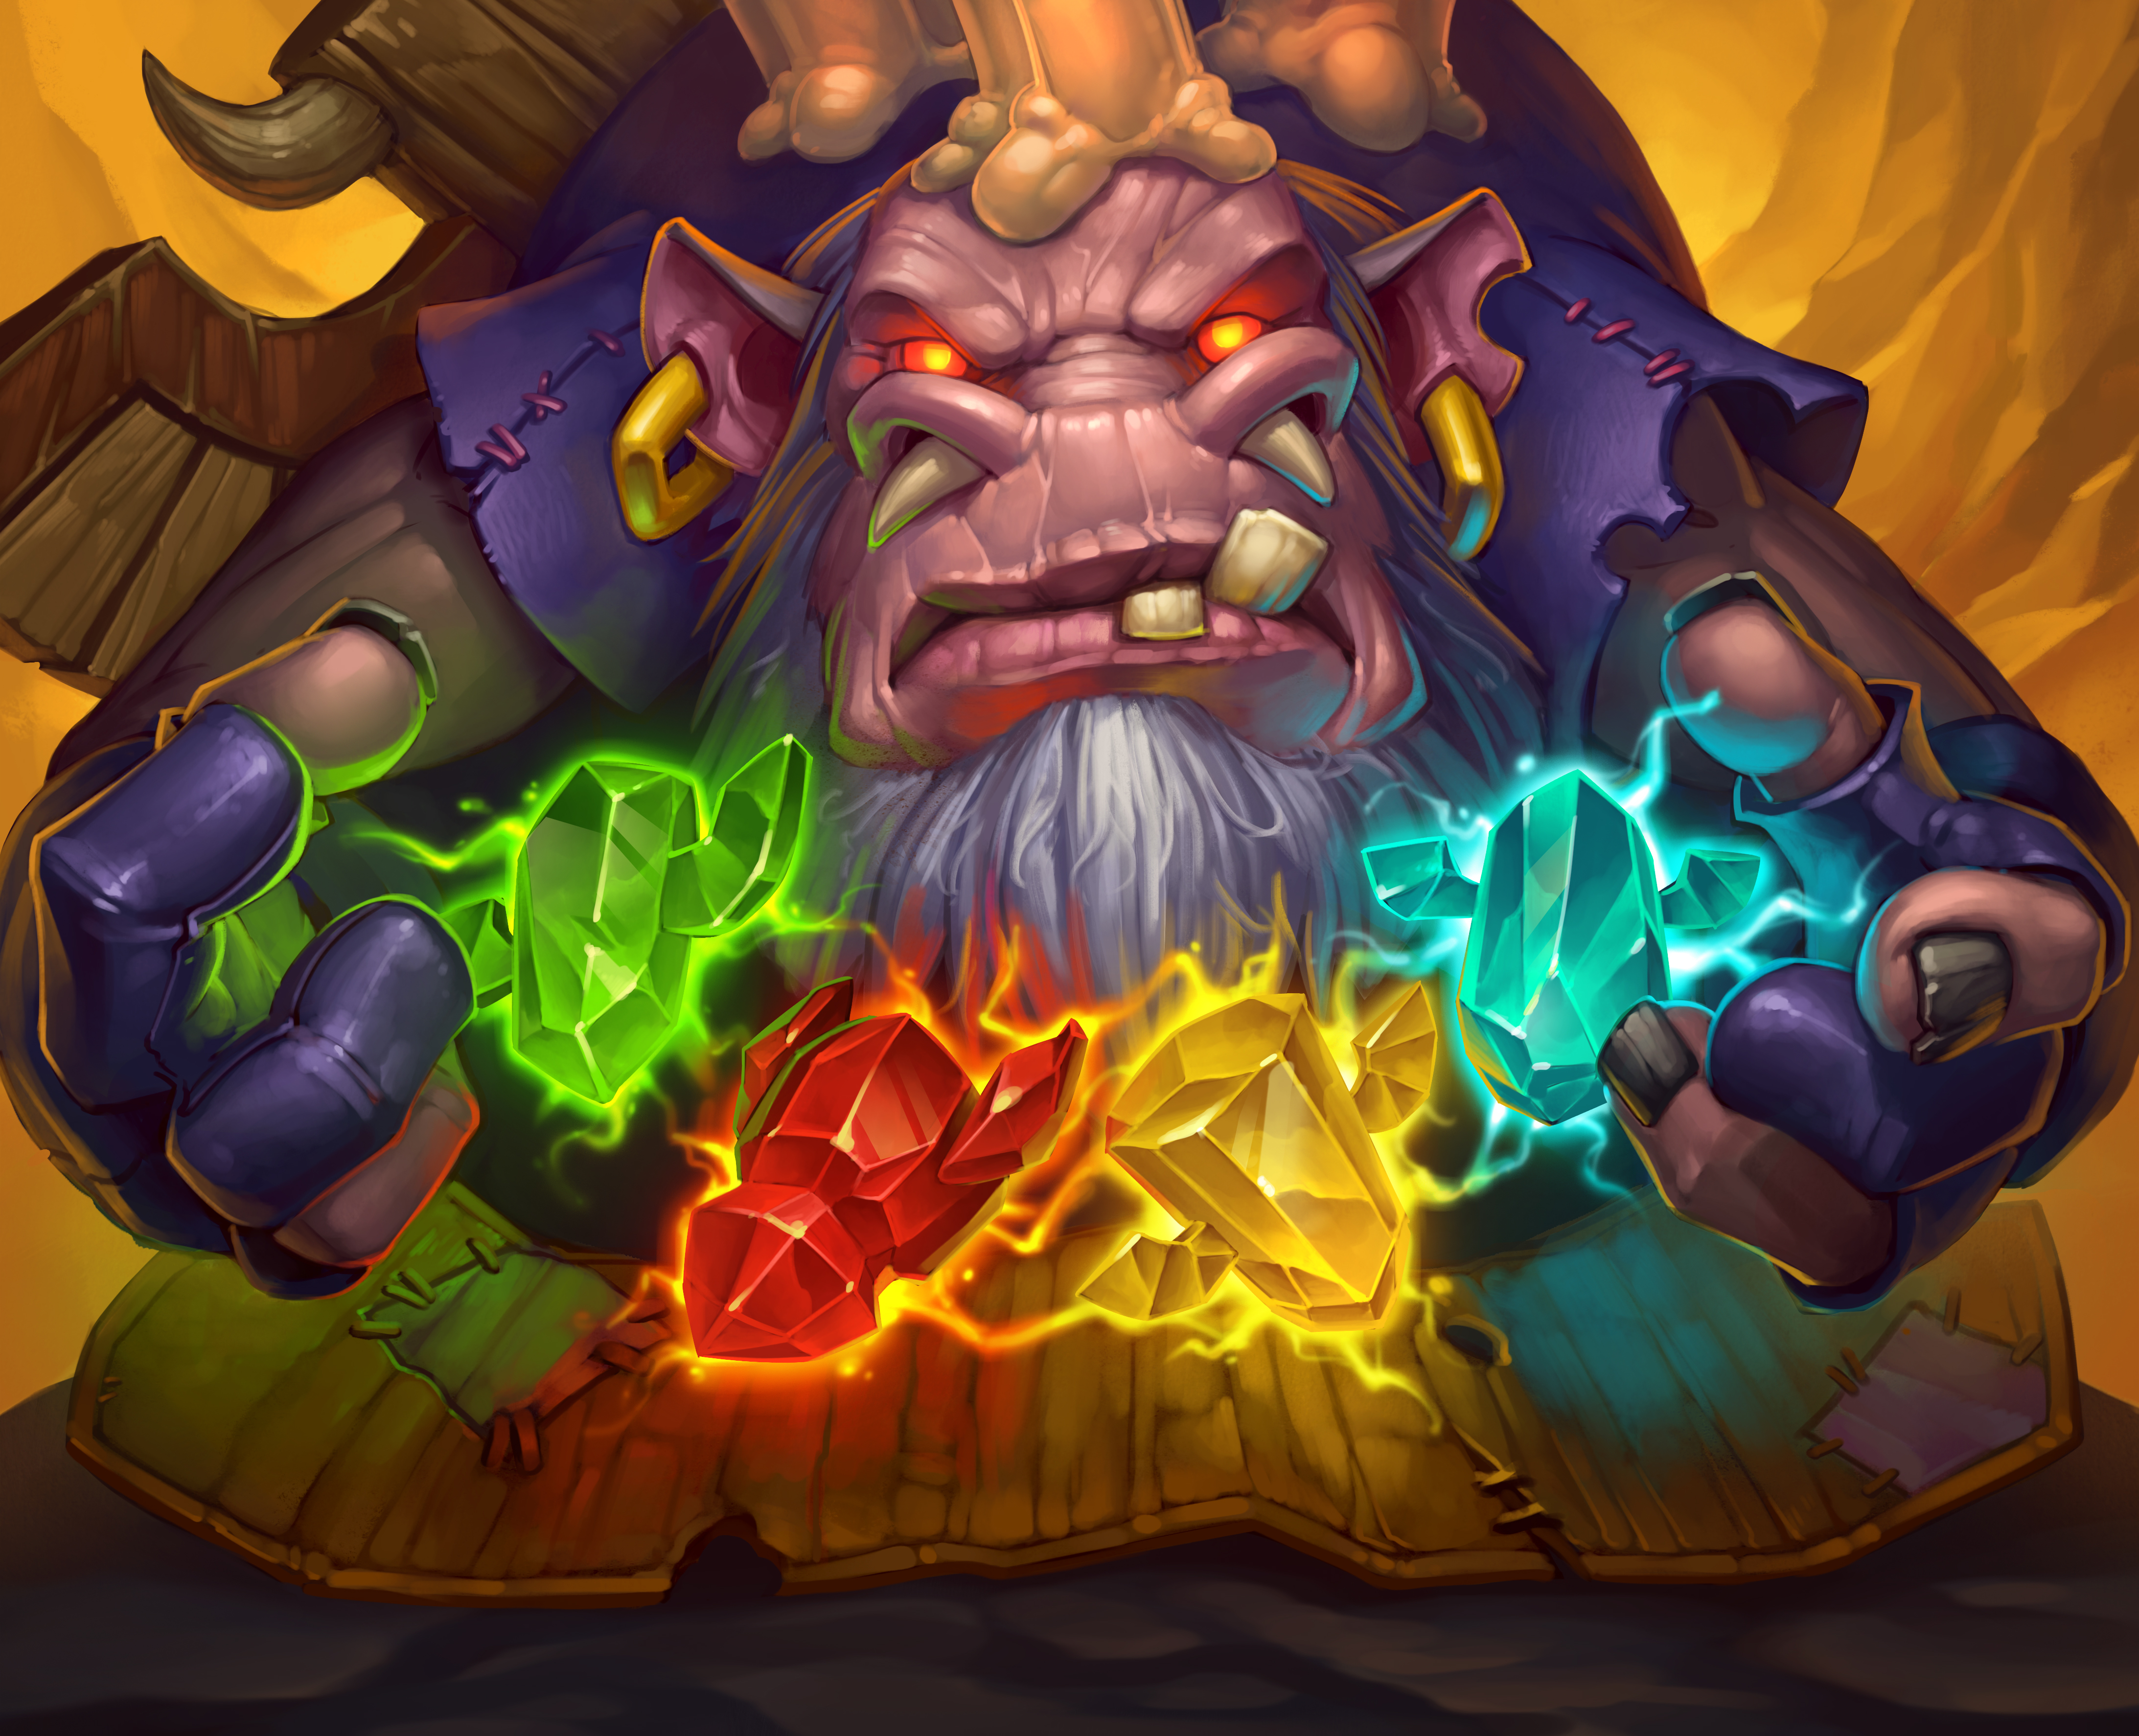 Hearthstone Heroes Of Warcraft Hearthstone Kobolds And Catacombs Video Games 4371x3548